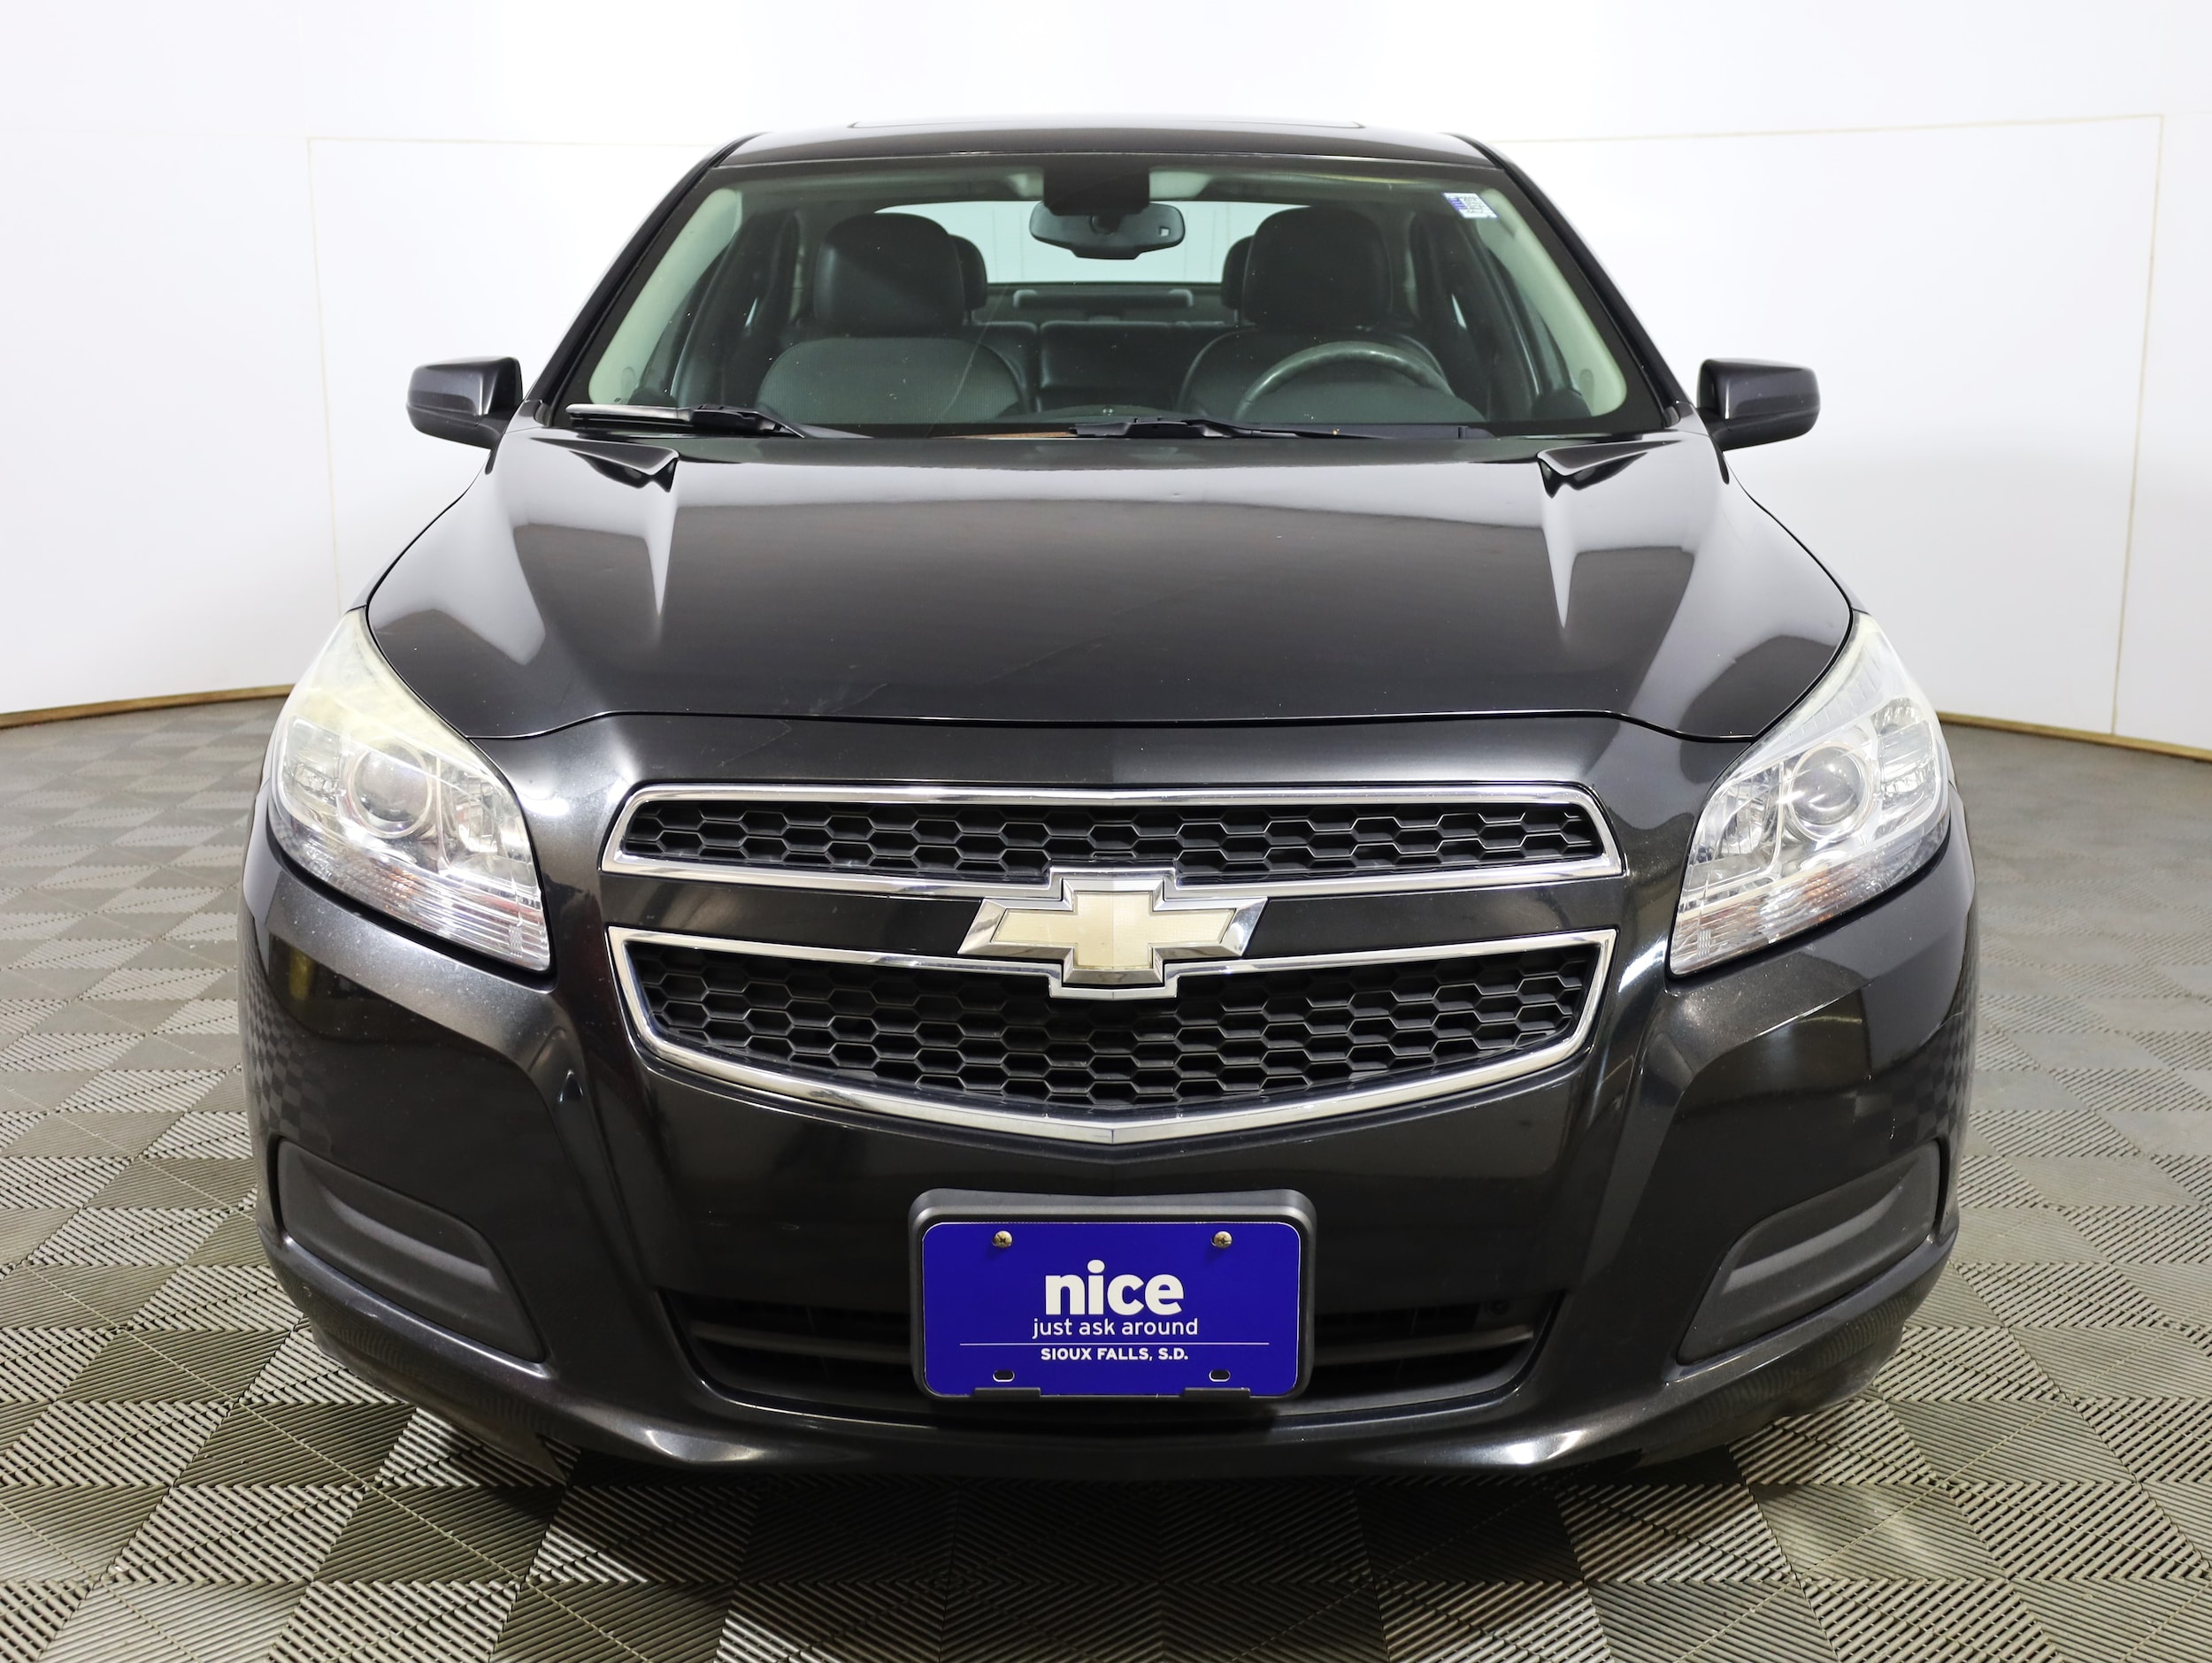 Used 2013 Chevrolet Malibu 1SA with VIN 1G11D5RR5DF108147 for sale in Sioux Falls, SD